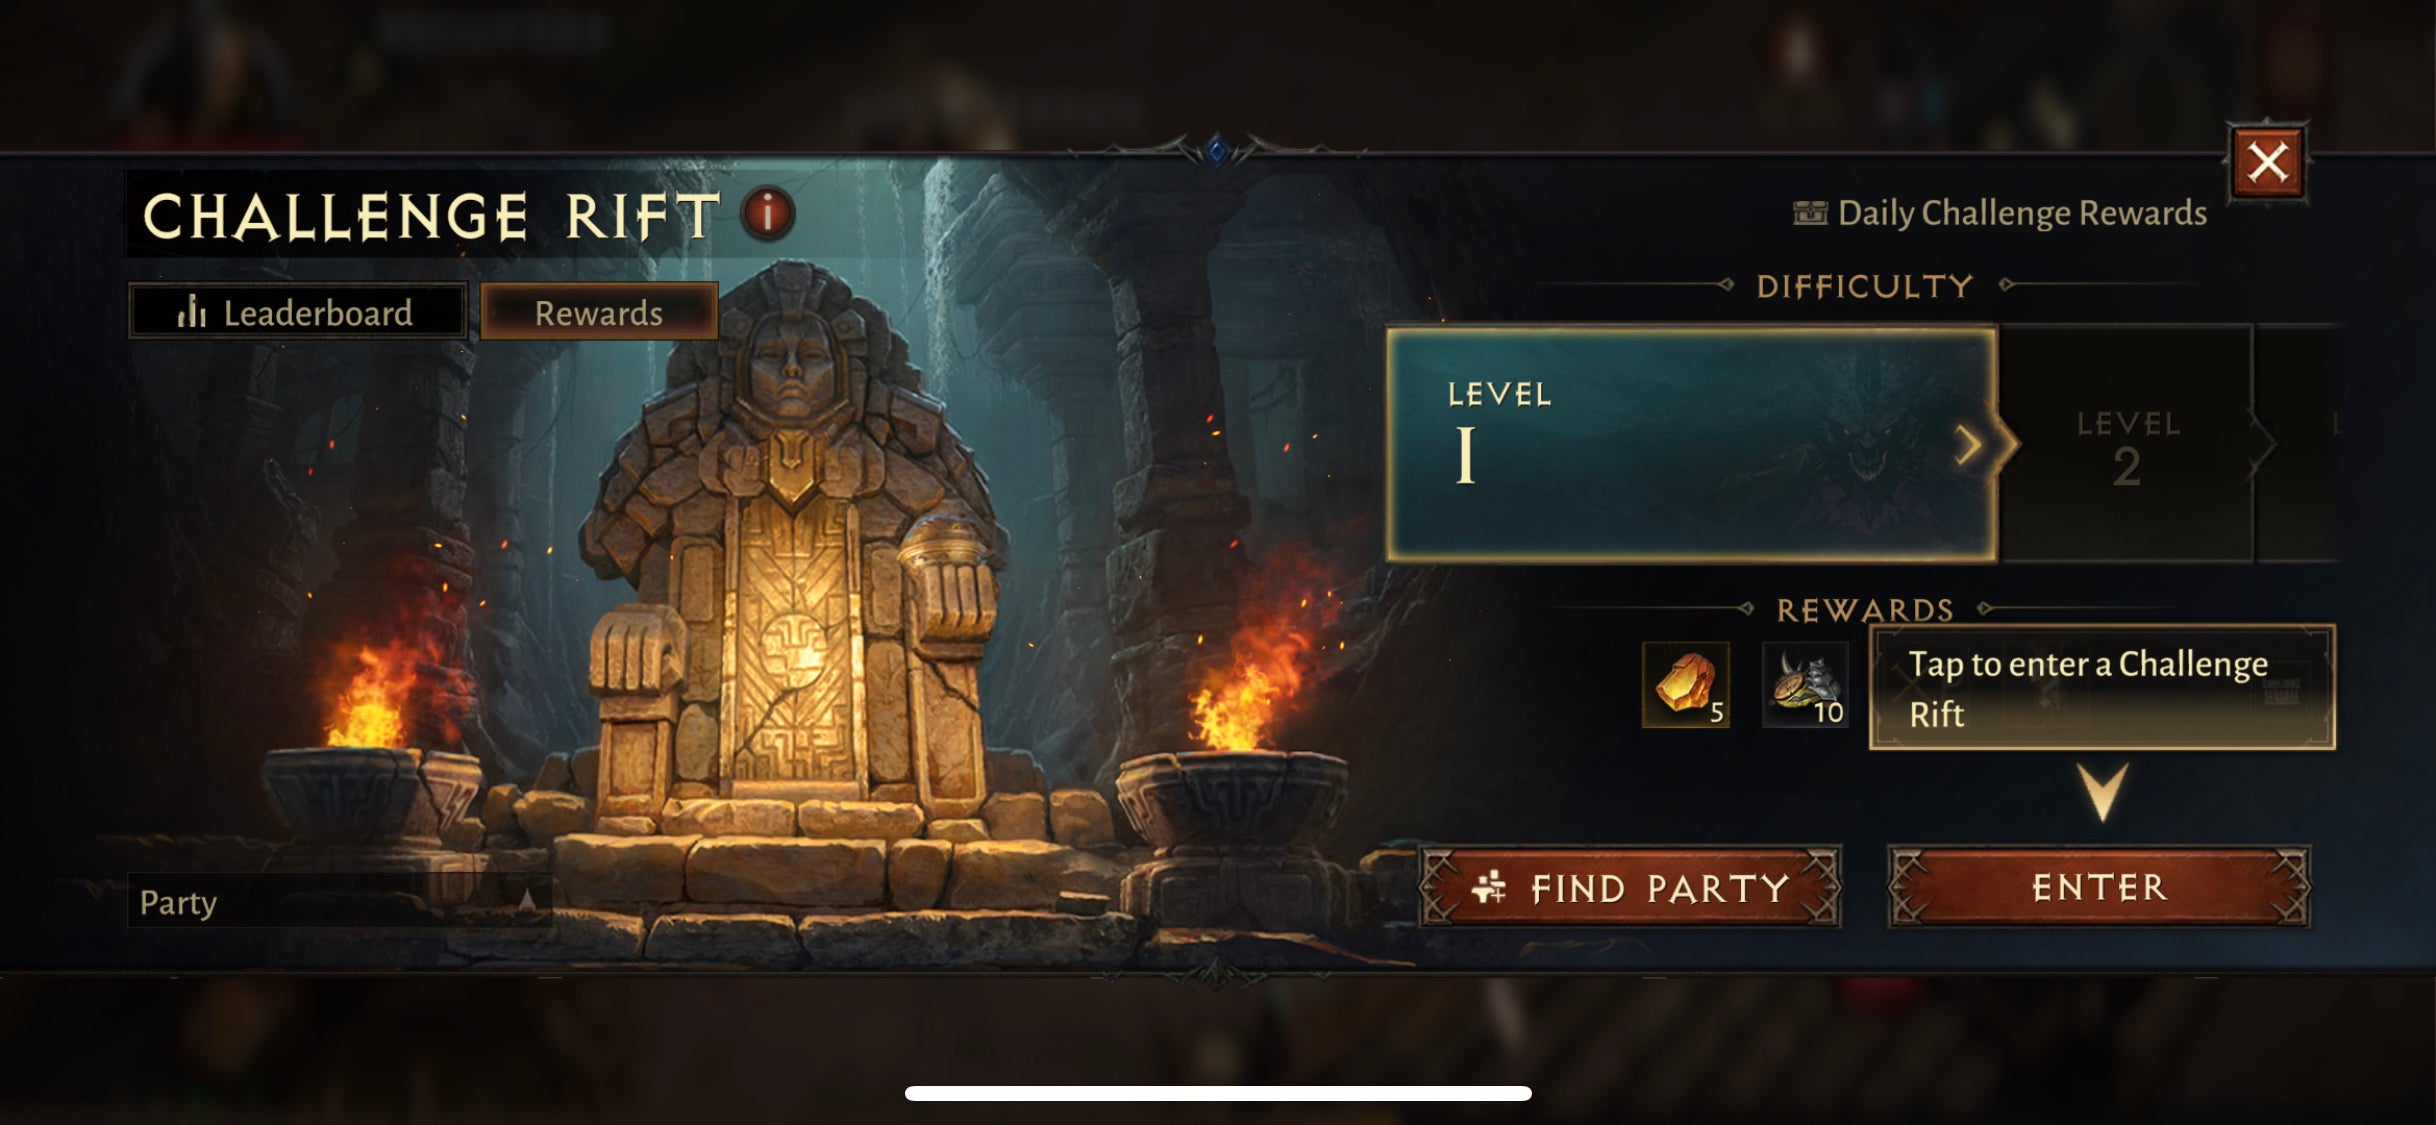 The screen showing the different difficulty levels of the Challenge Rift in Diablo Immortal